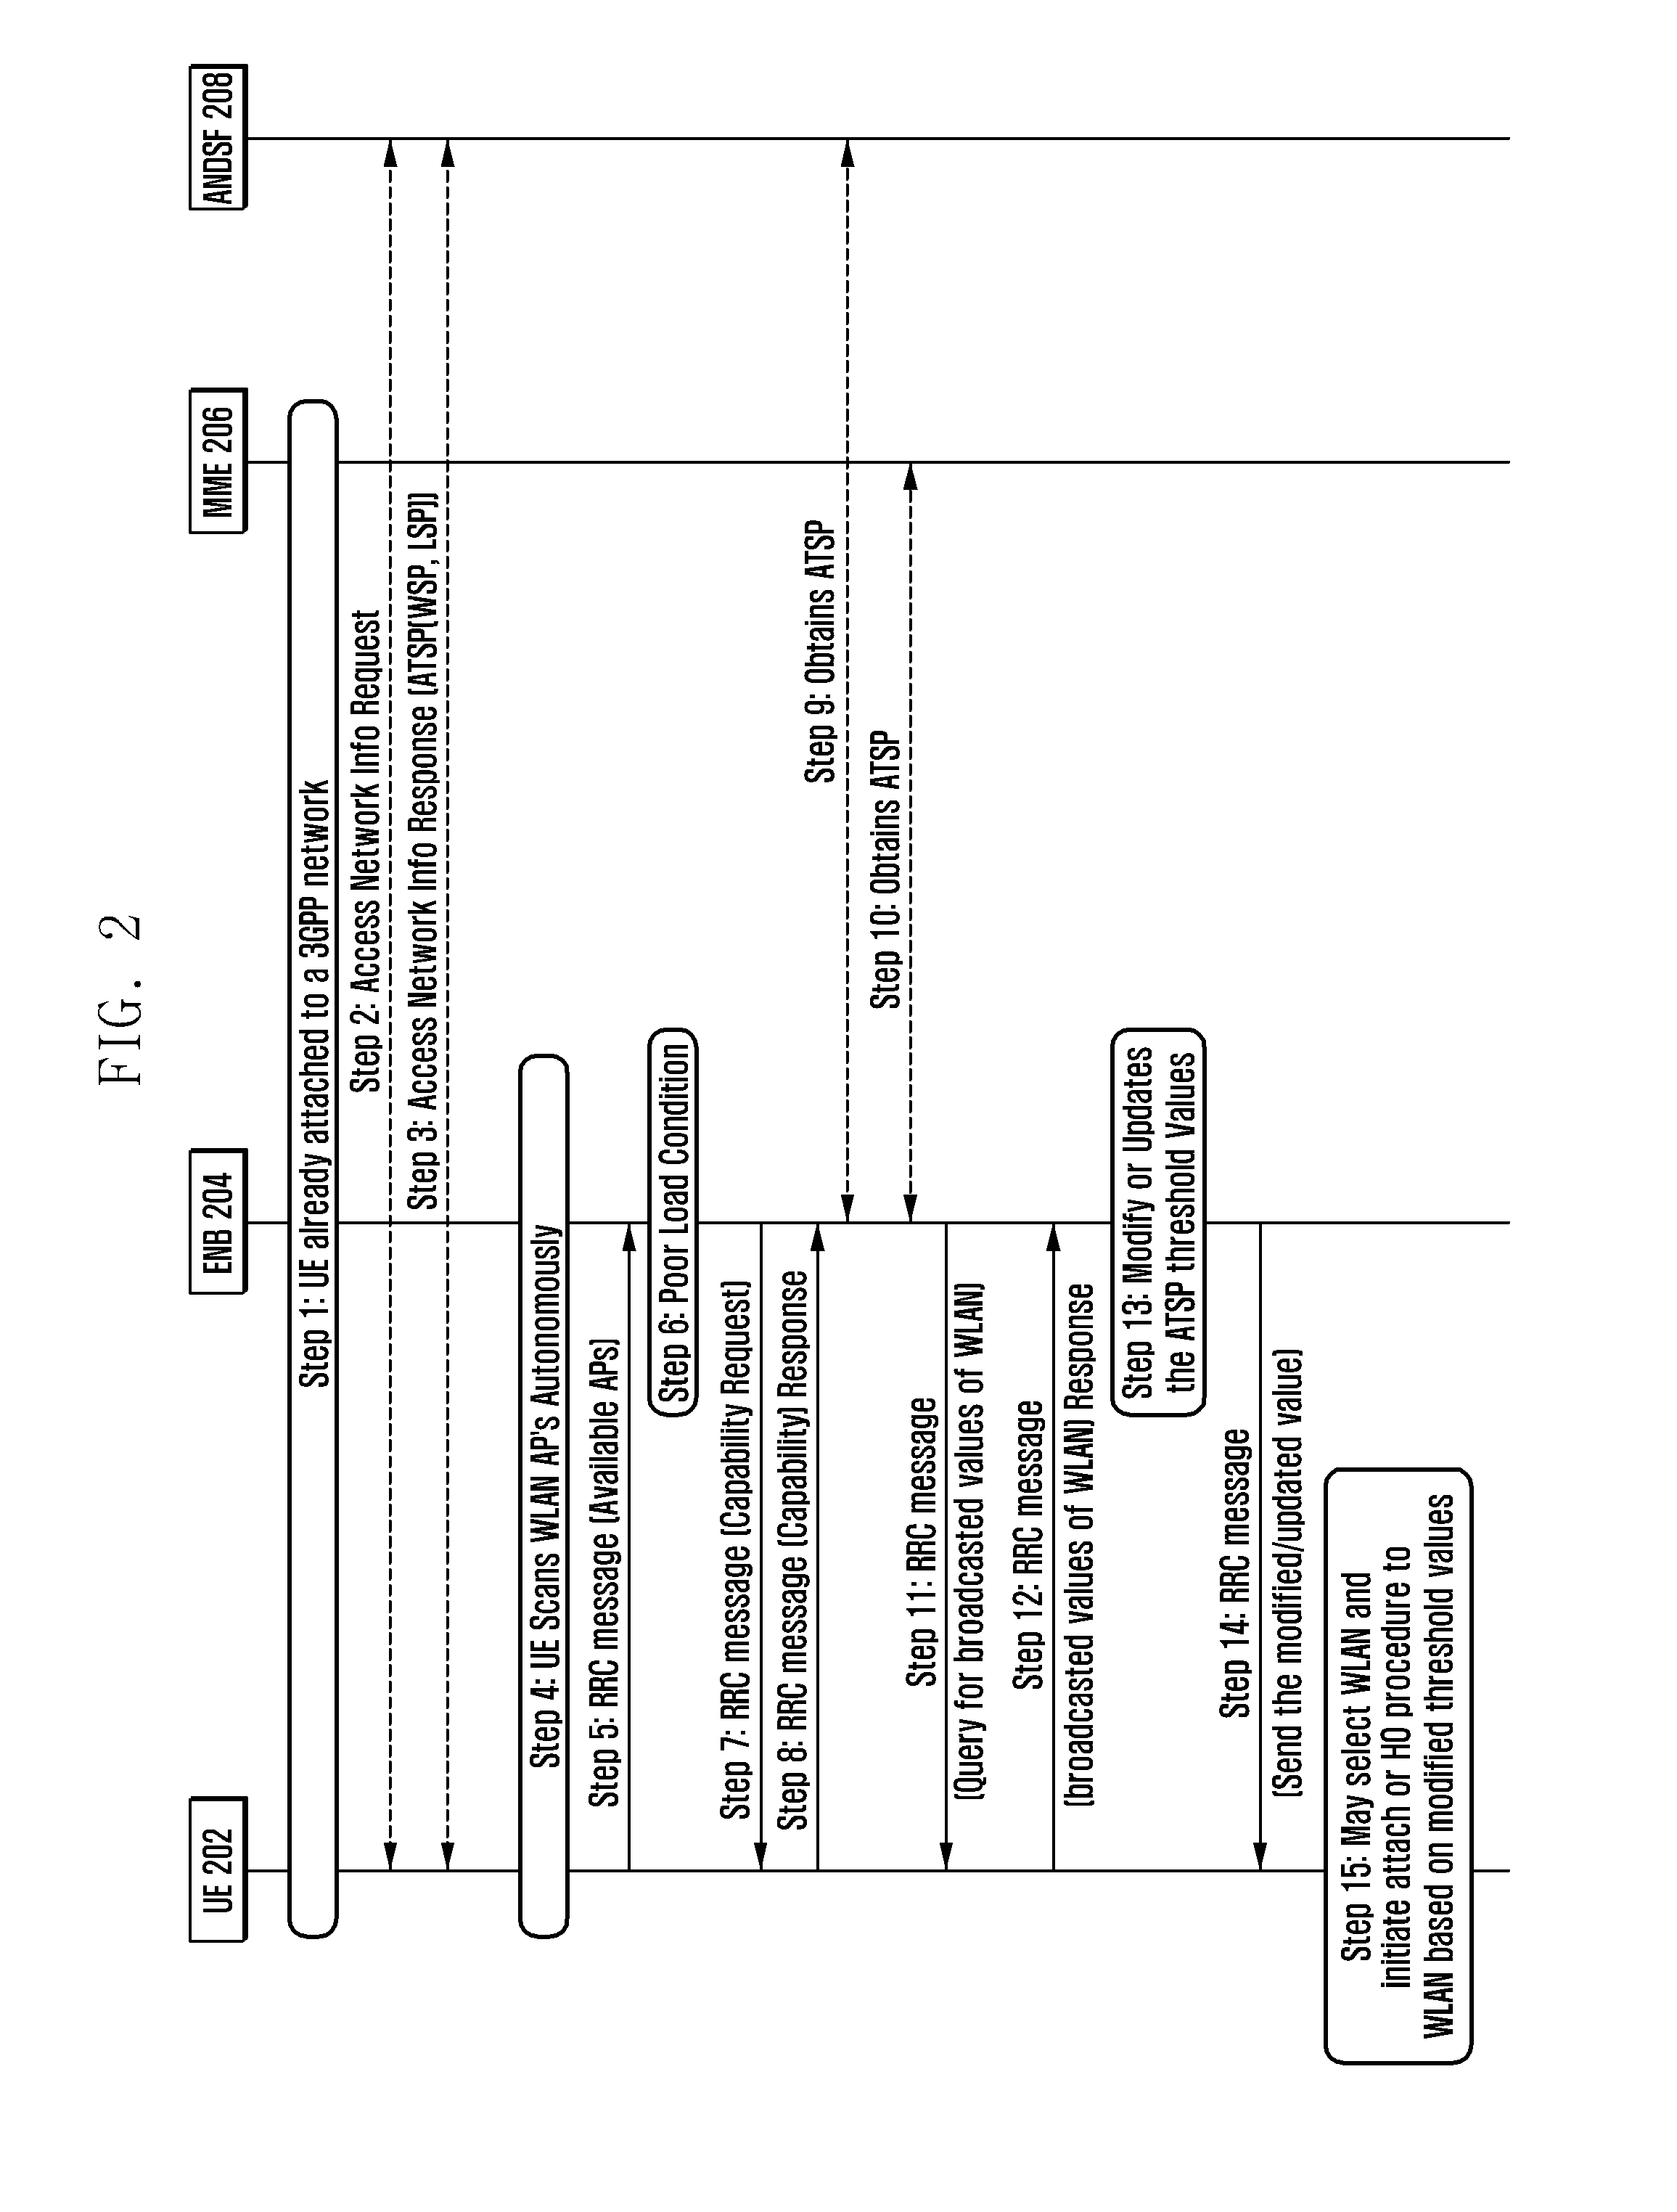 Method and system for offloading handover of wireless connections from a LTE network to a wi-fi network